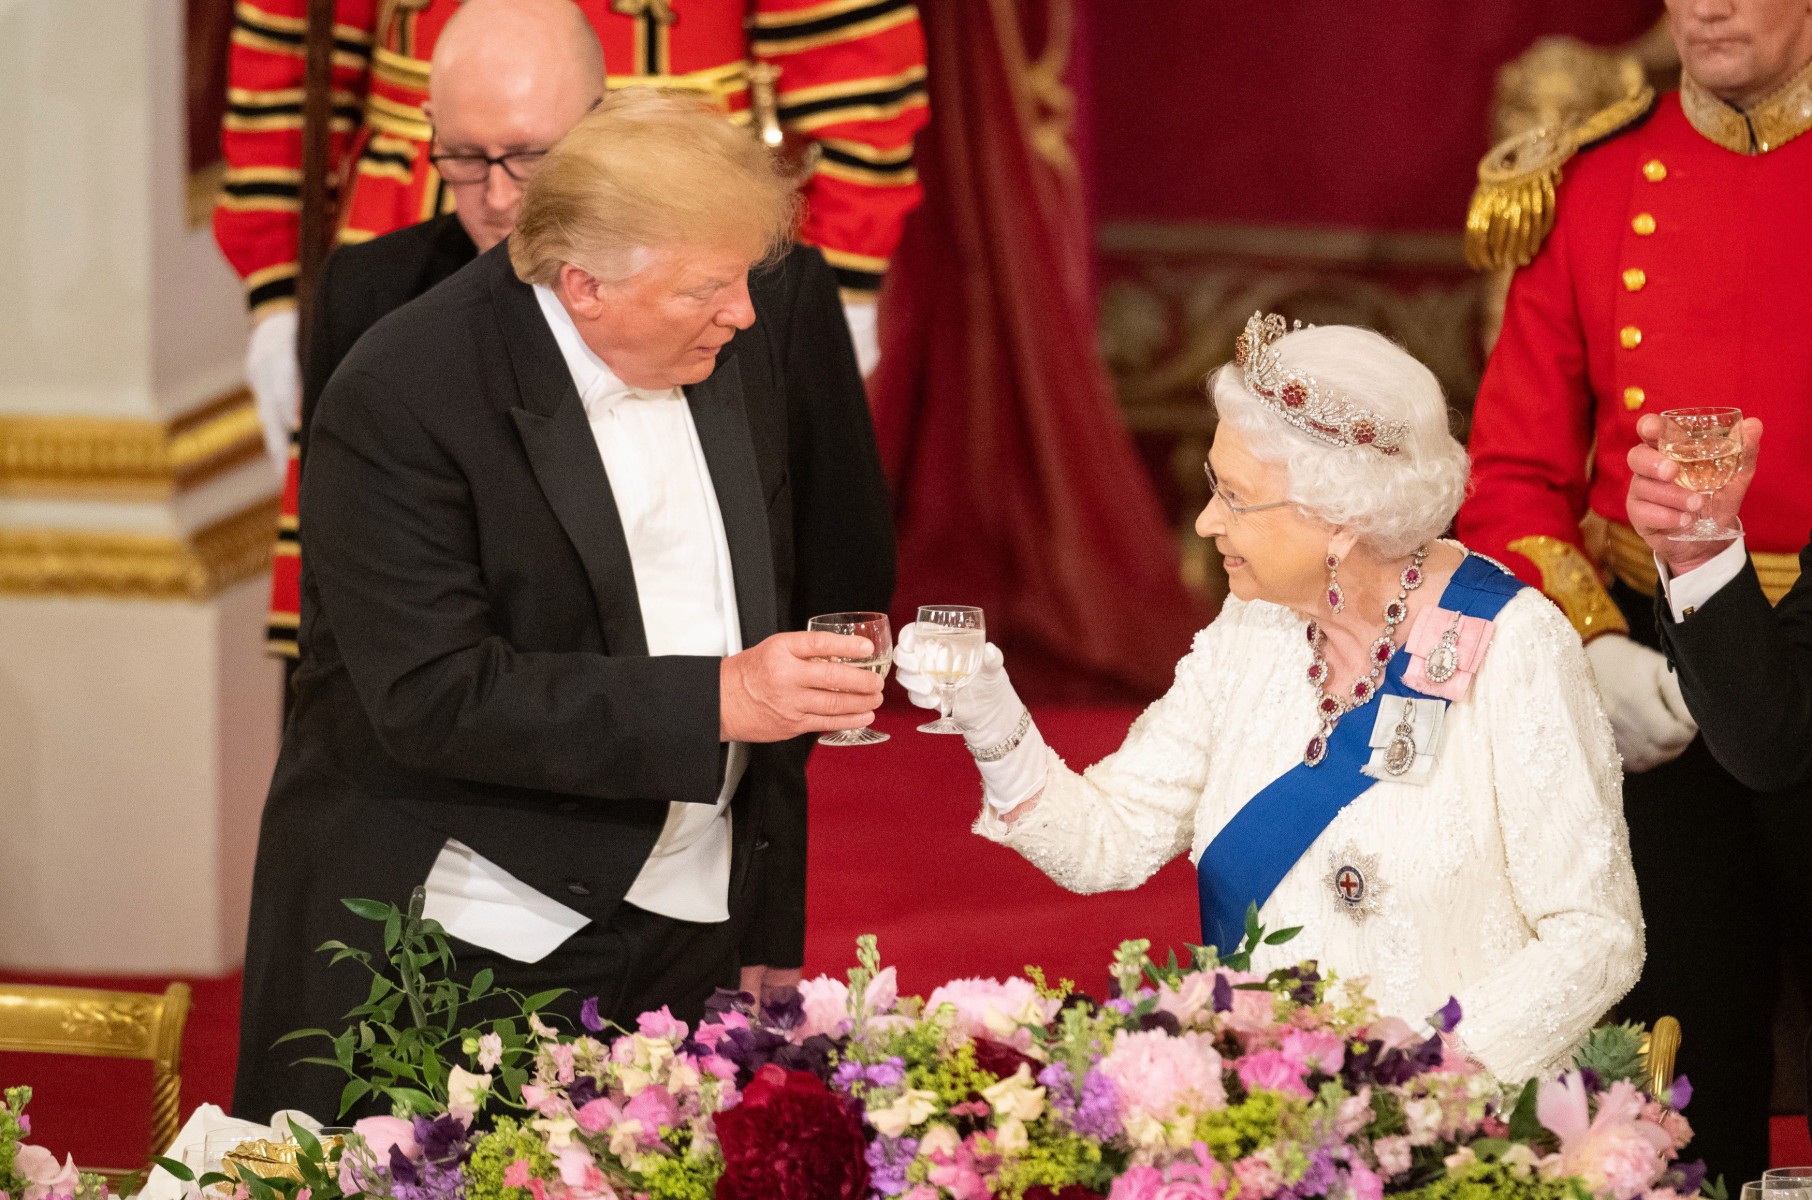 The Queen hosted US President Donald Trump during a state visit earlier in the summer